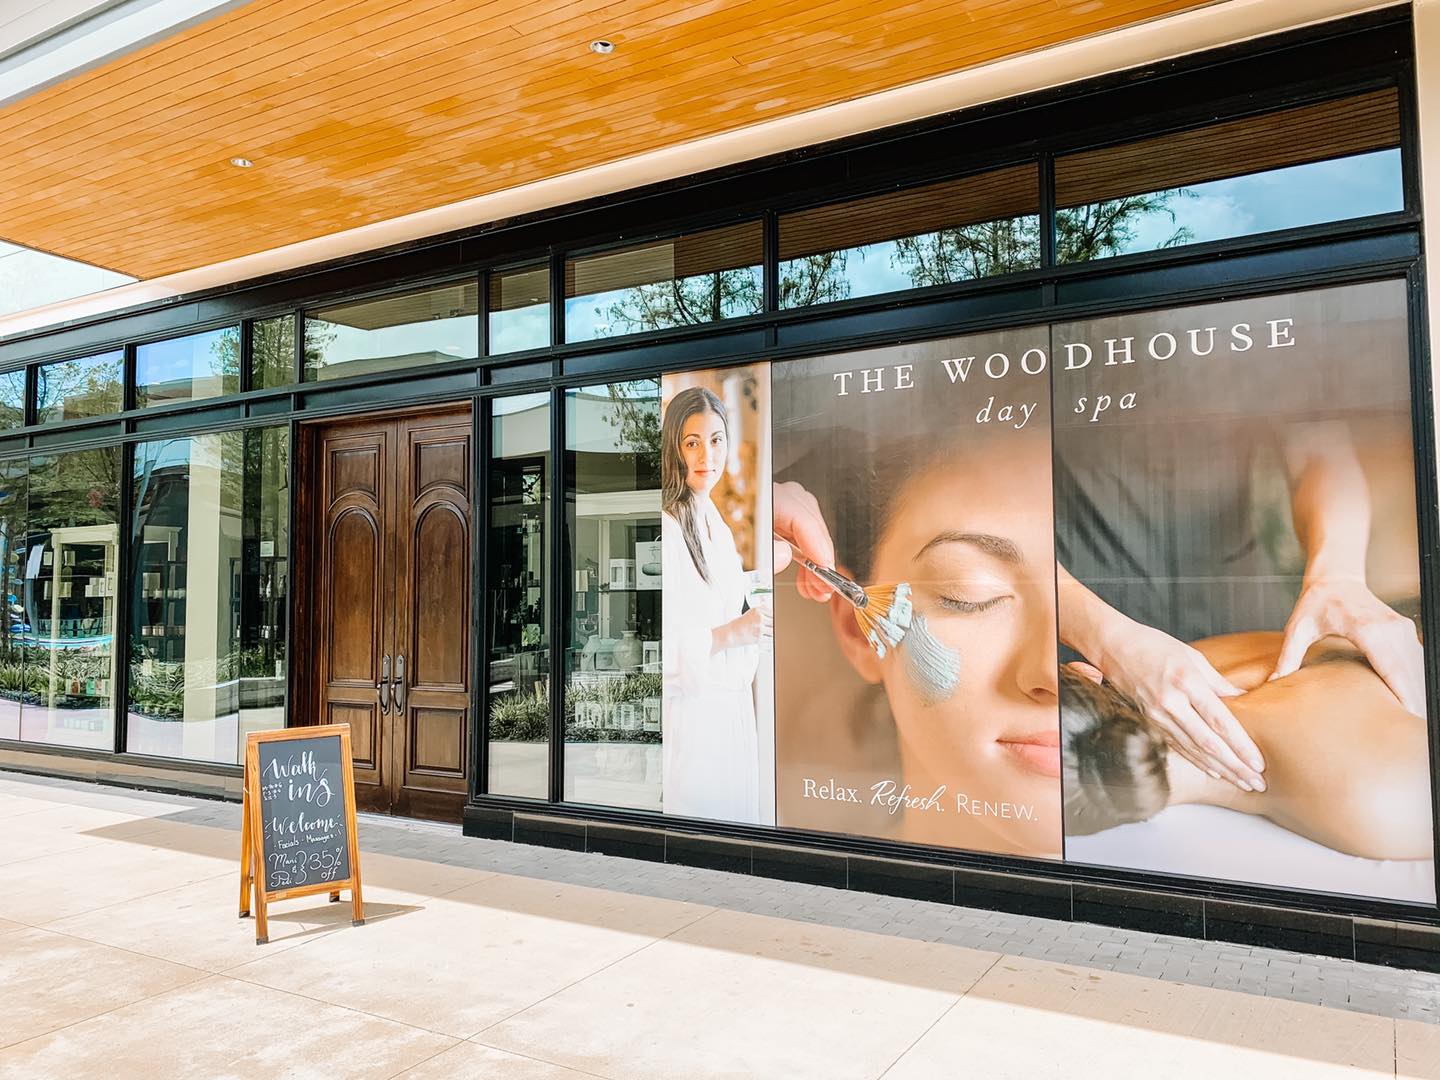 The Woodhouse Day Spa in Friendswood, TX by Westwood Contractors